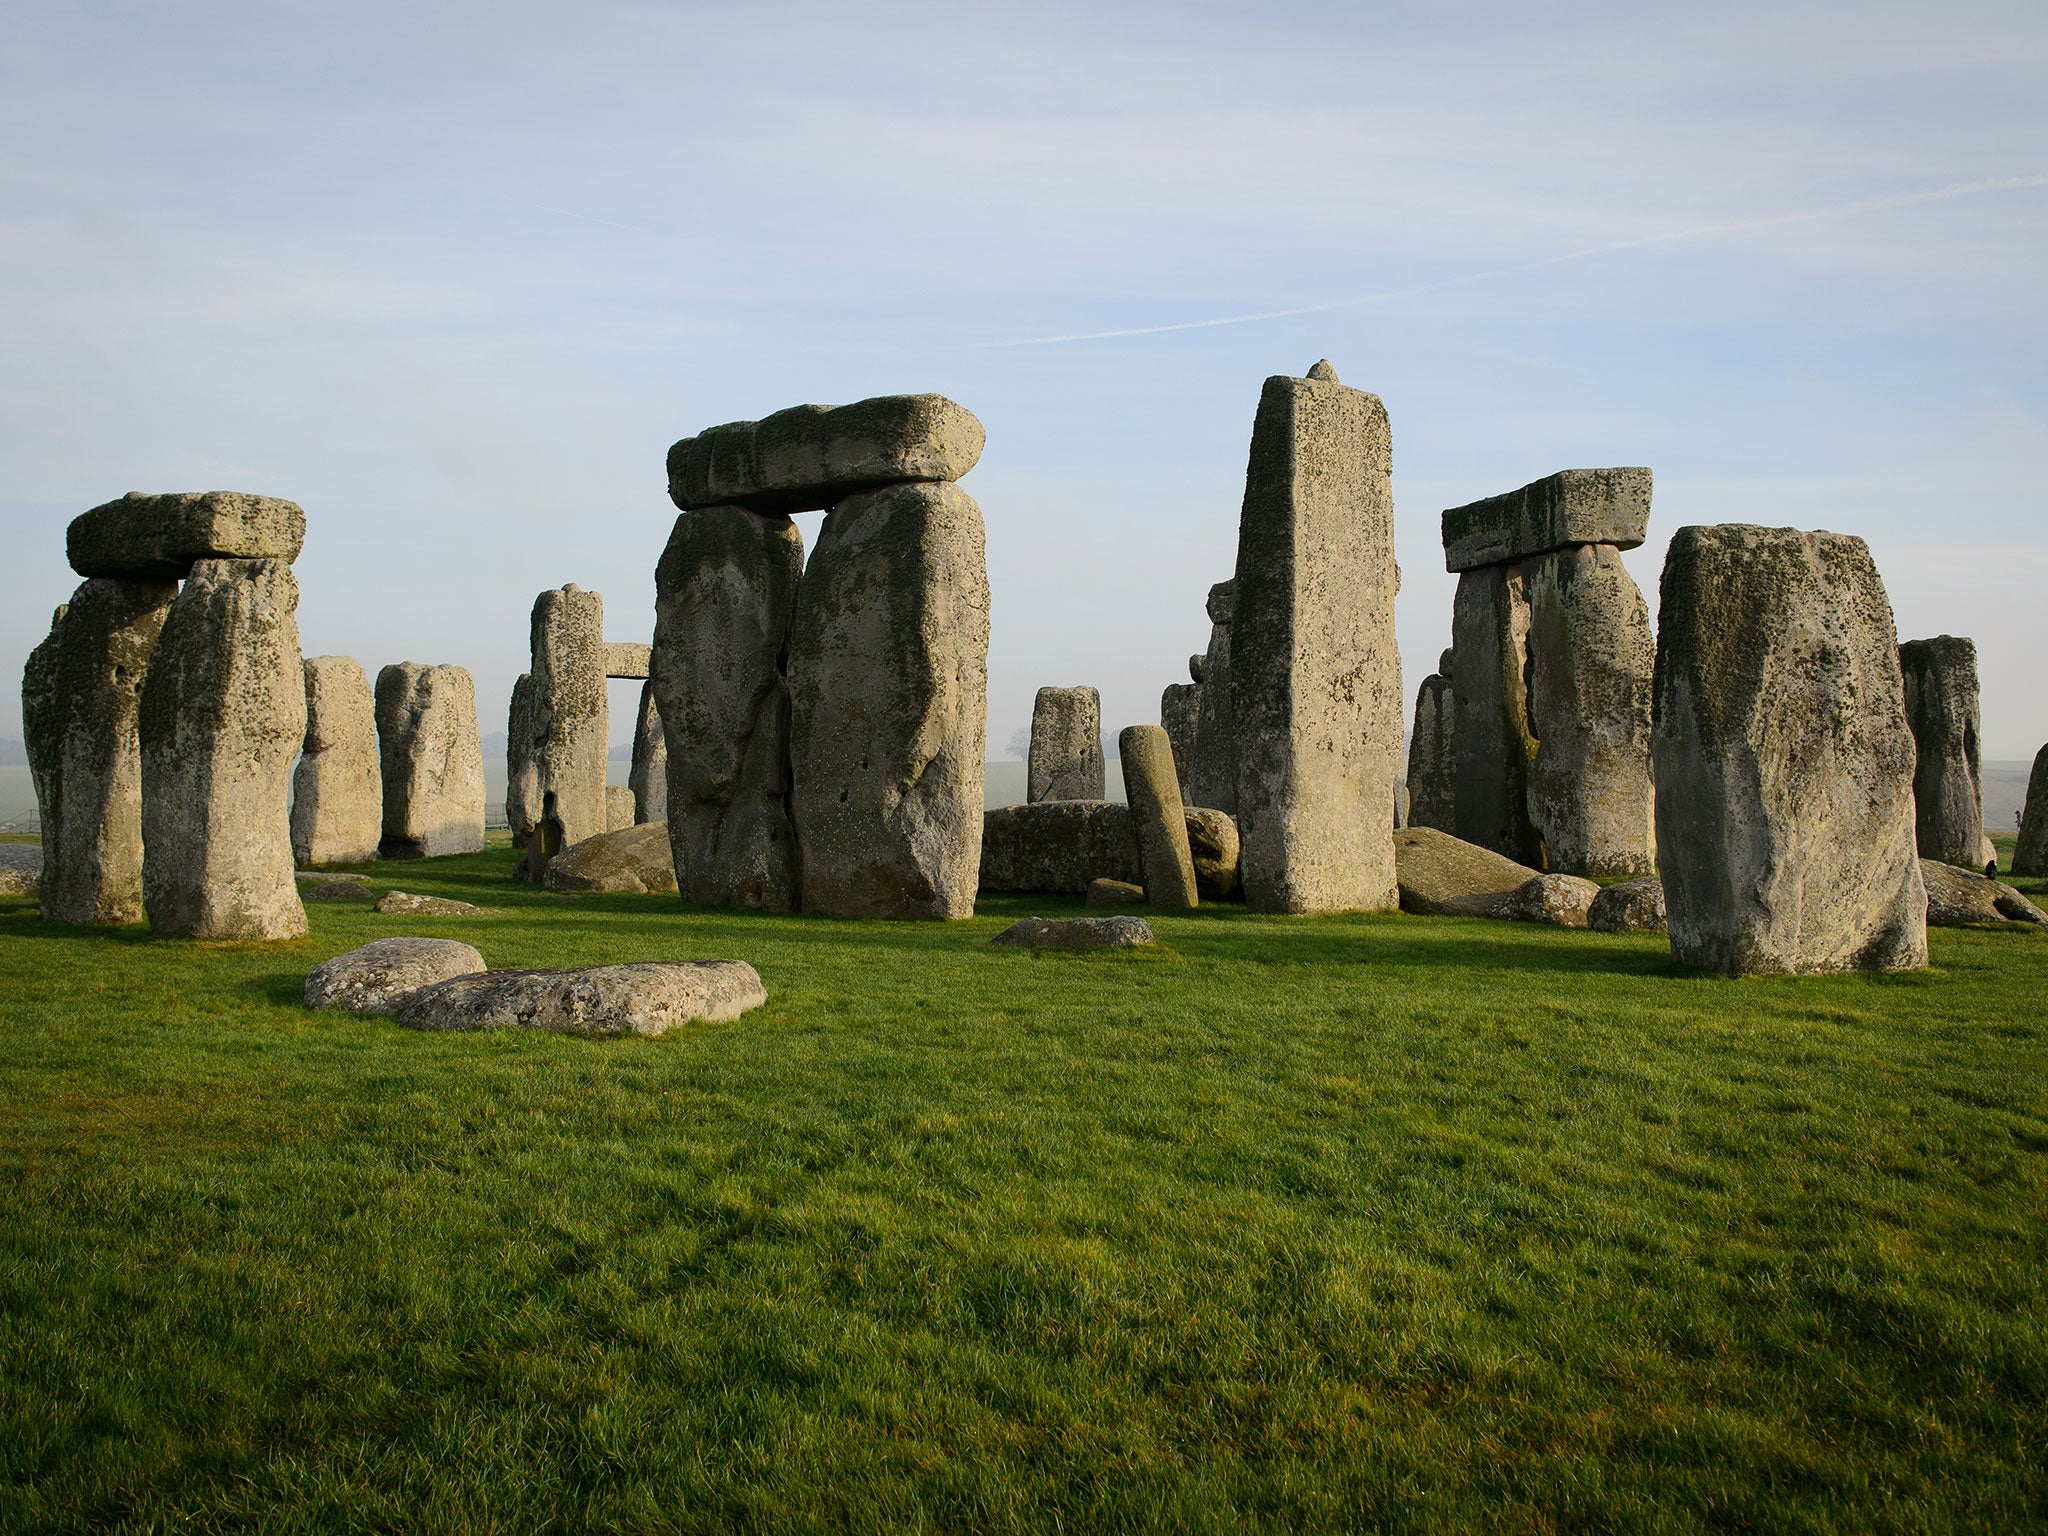 Britain’s “peculiar” transport system makes access from London to some leading tourist attractions like Stonehenge exasperating